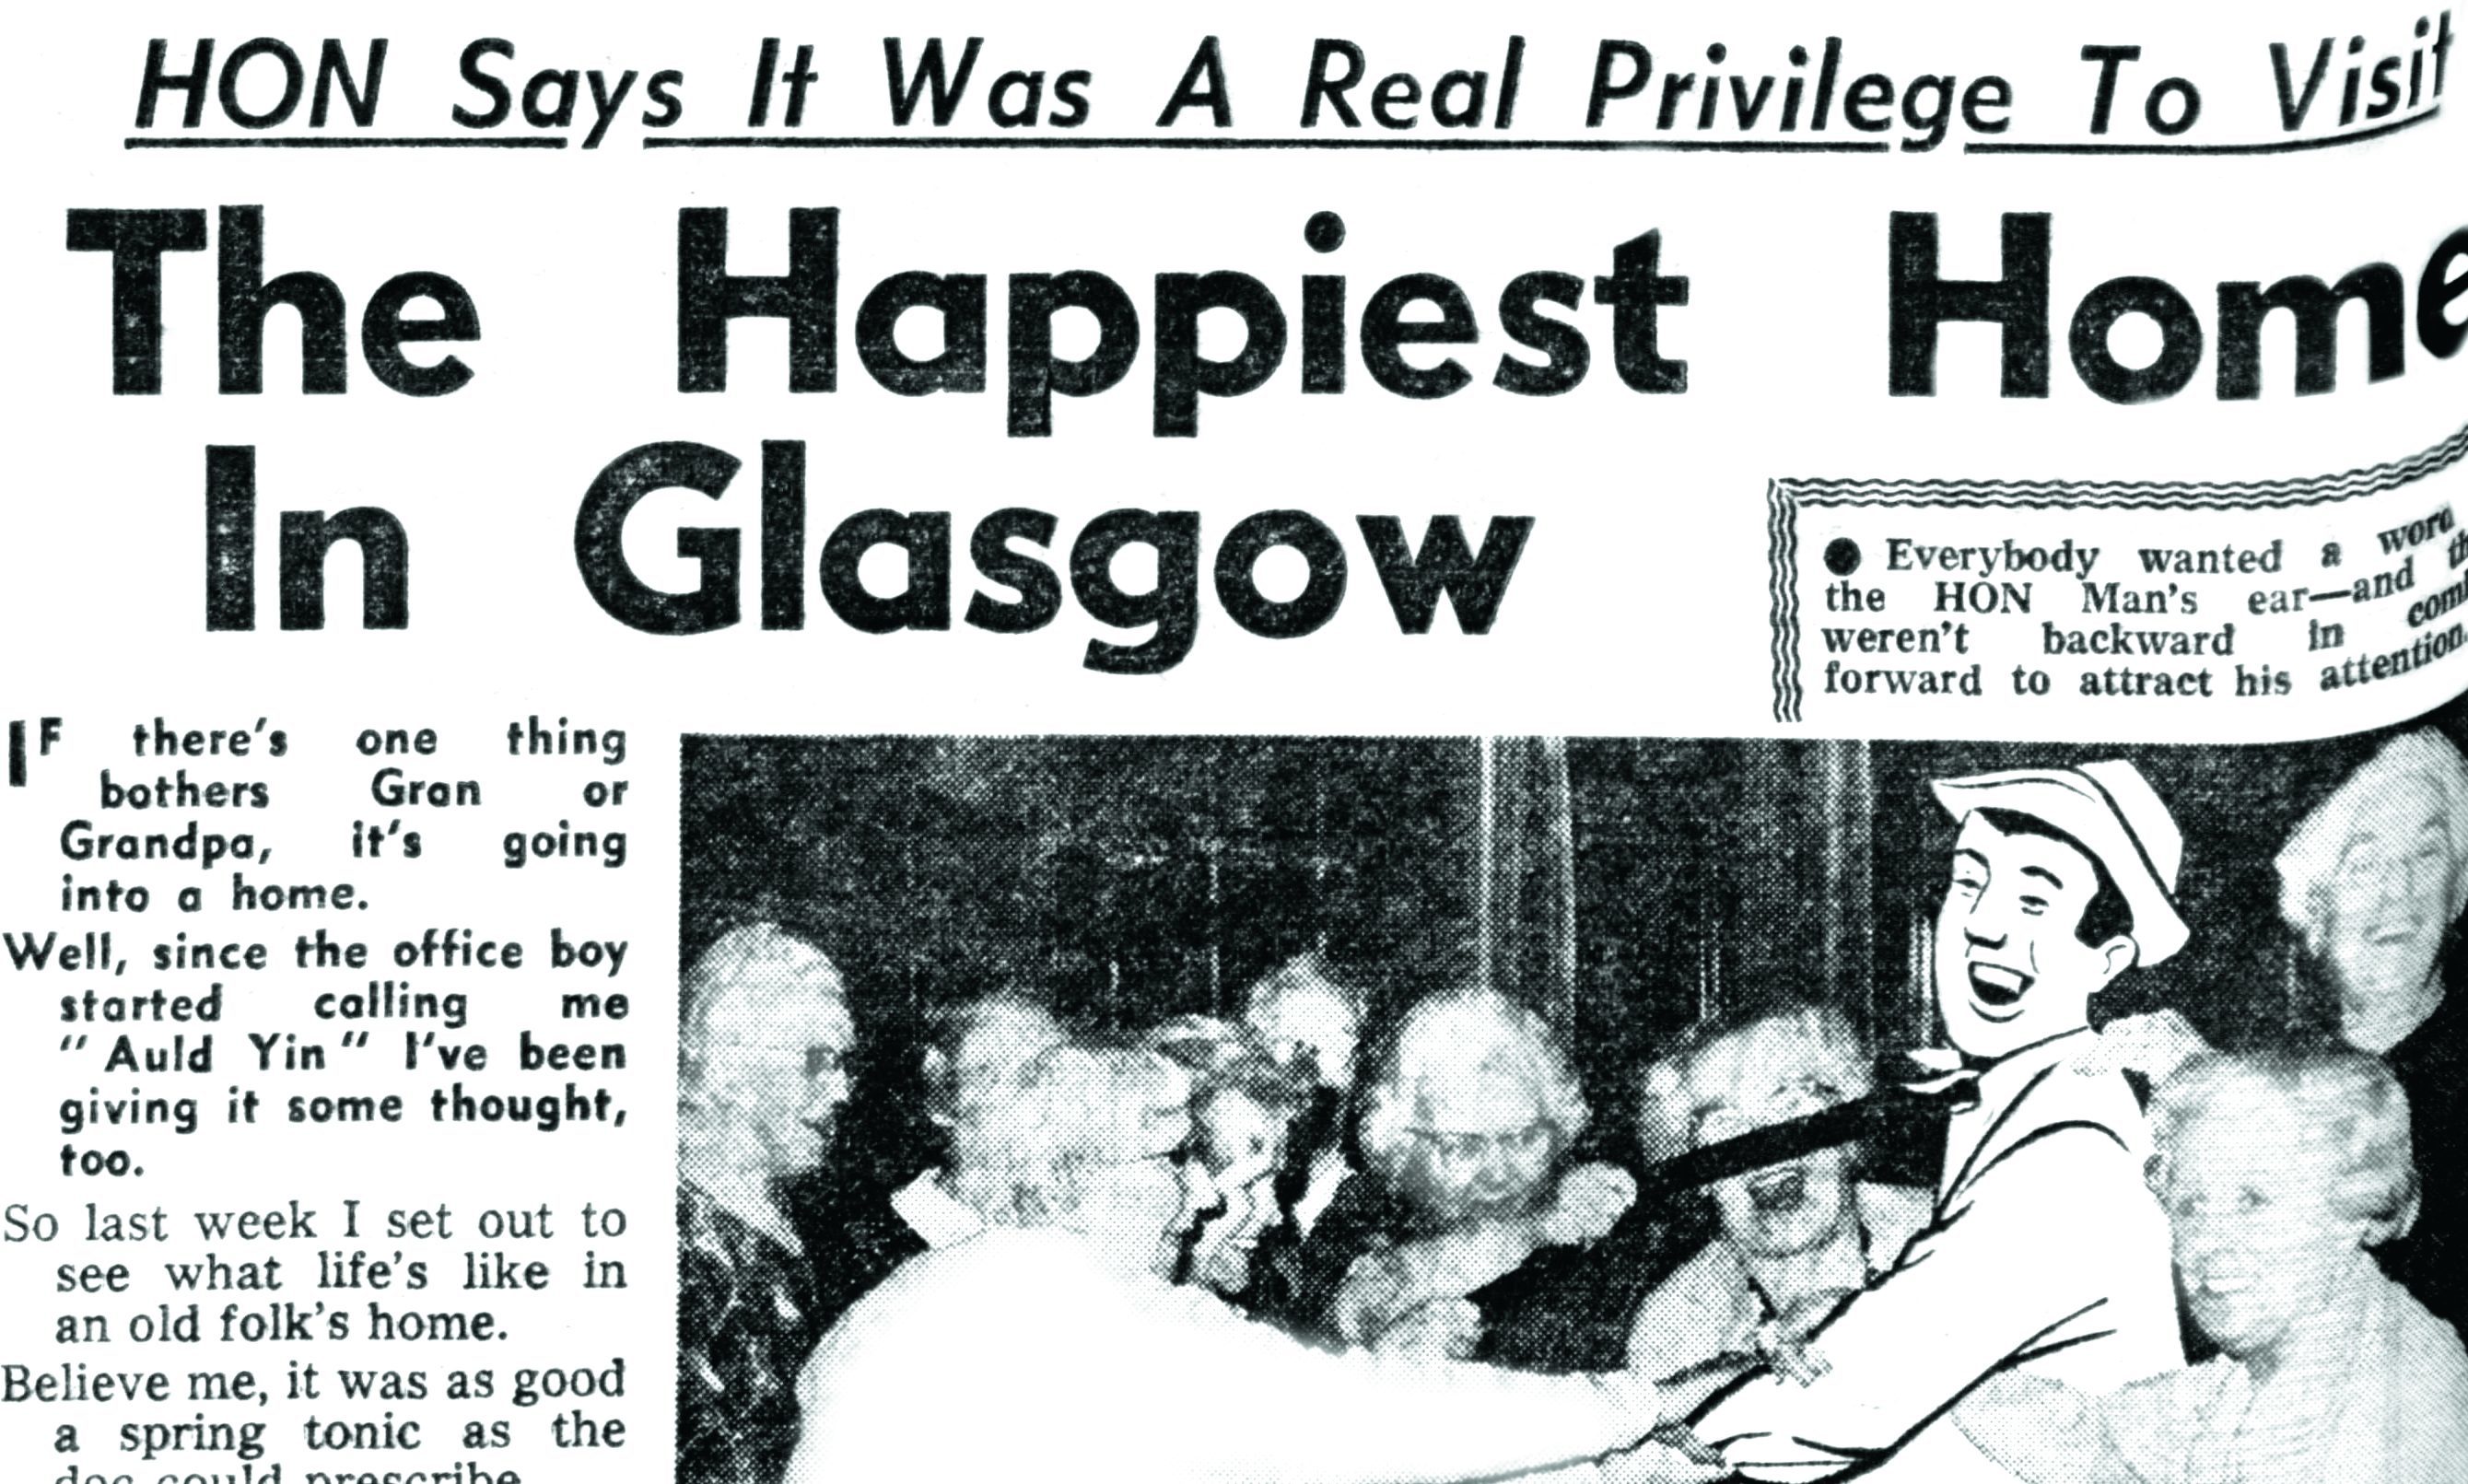 One of the "HON man" articles from 1975,